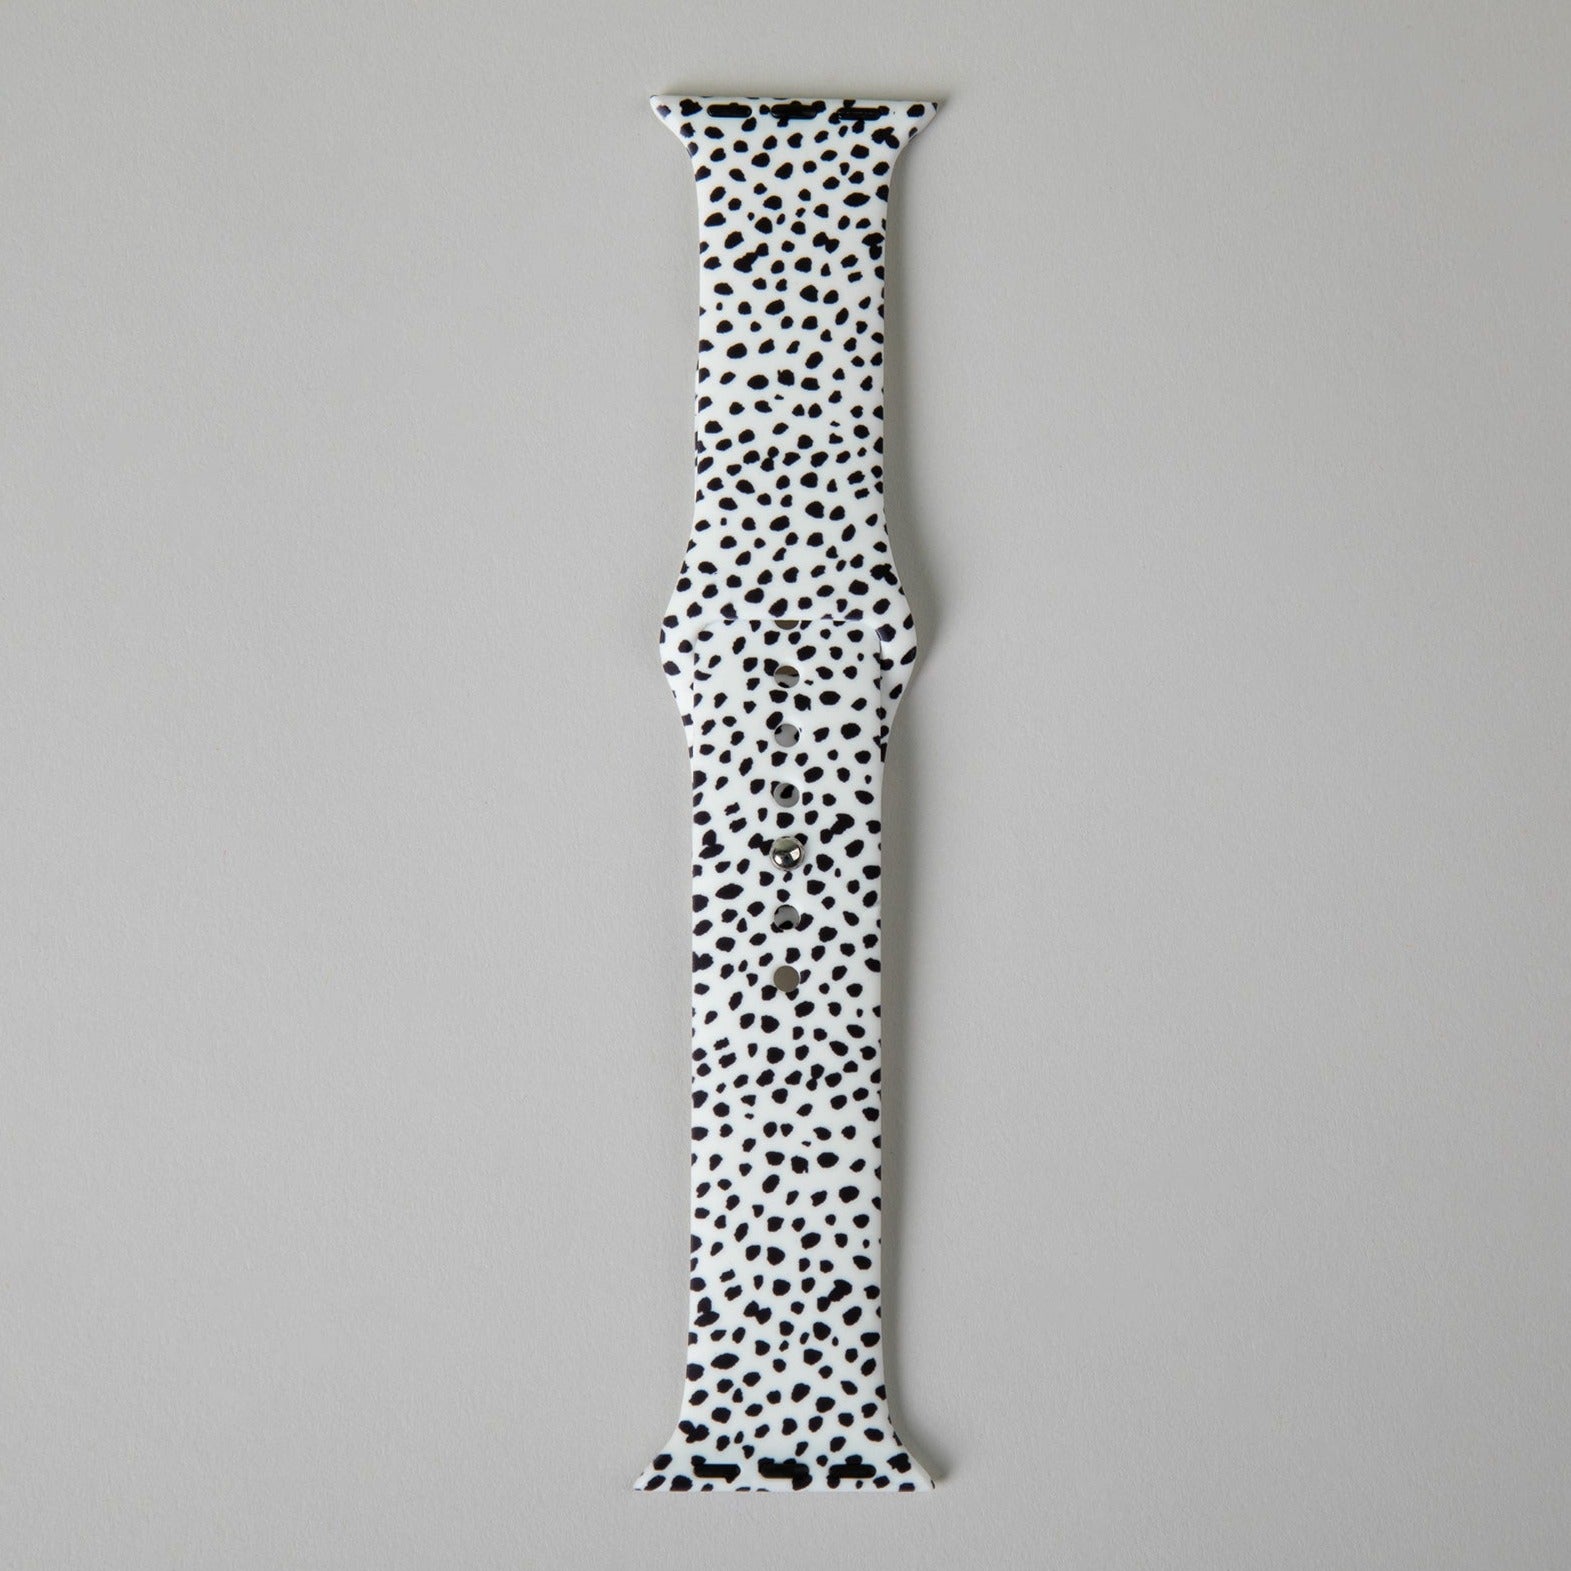 Patterned Silicone Apple Watch Band 38mm/40mm 42mm/44mm - Black & White Dalmatian - 38mm/40mm